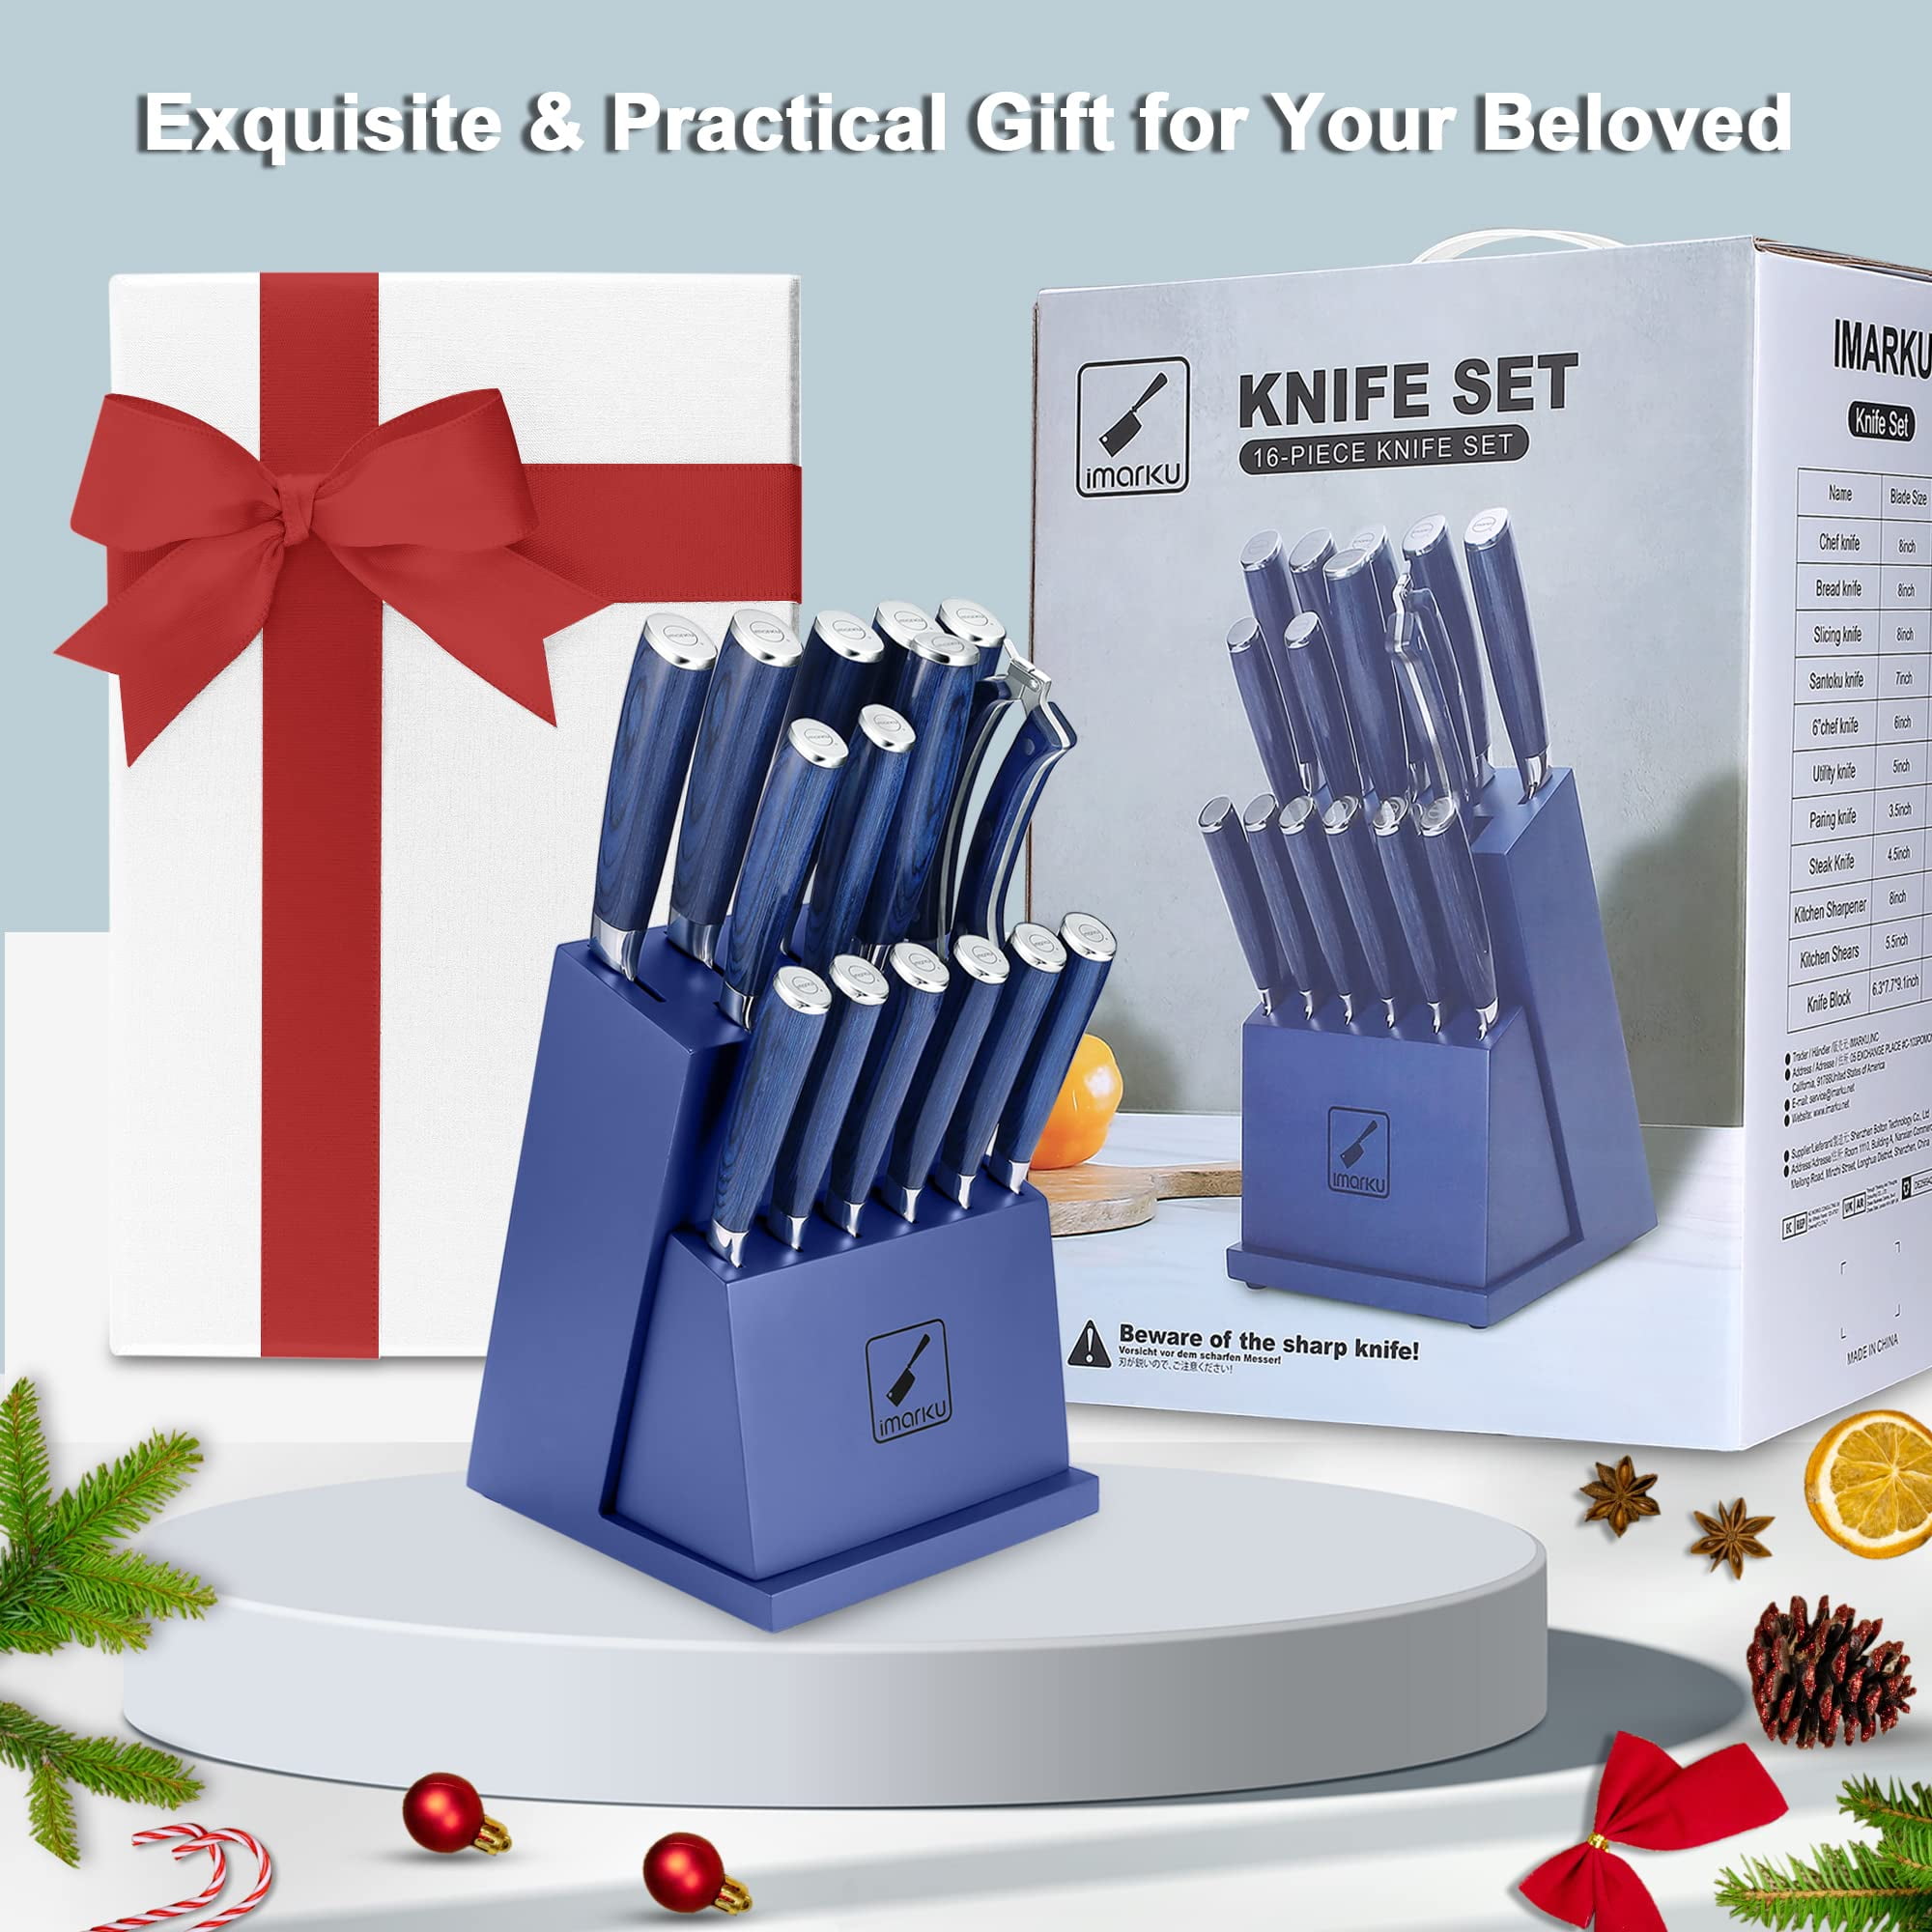 Say Goodbye to Rust with Our Rust-resistant Knife Set - IMARKU